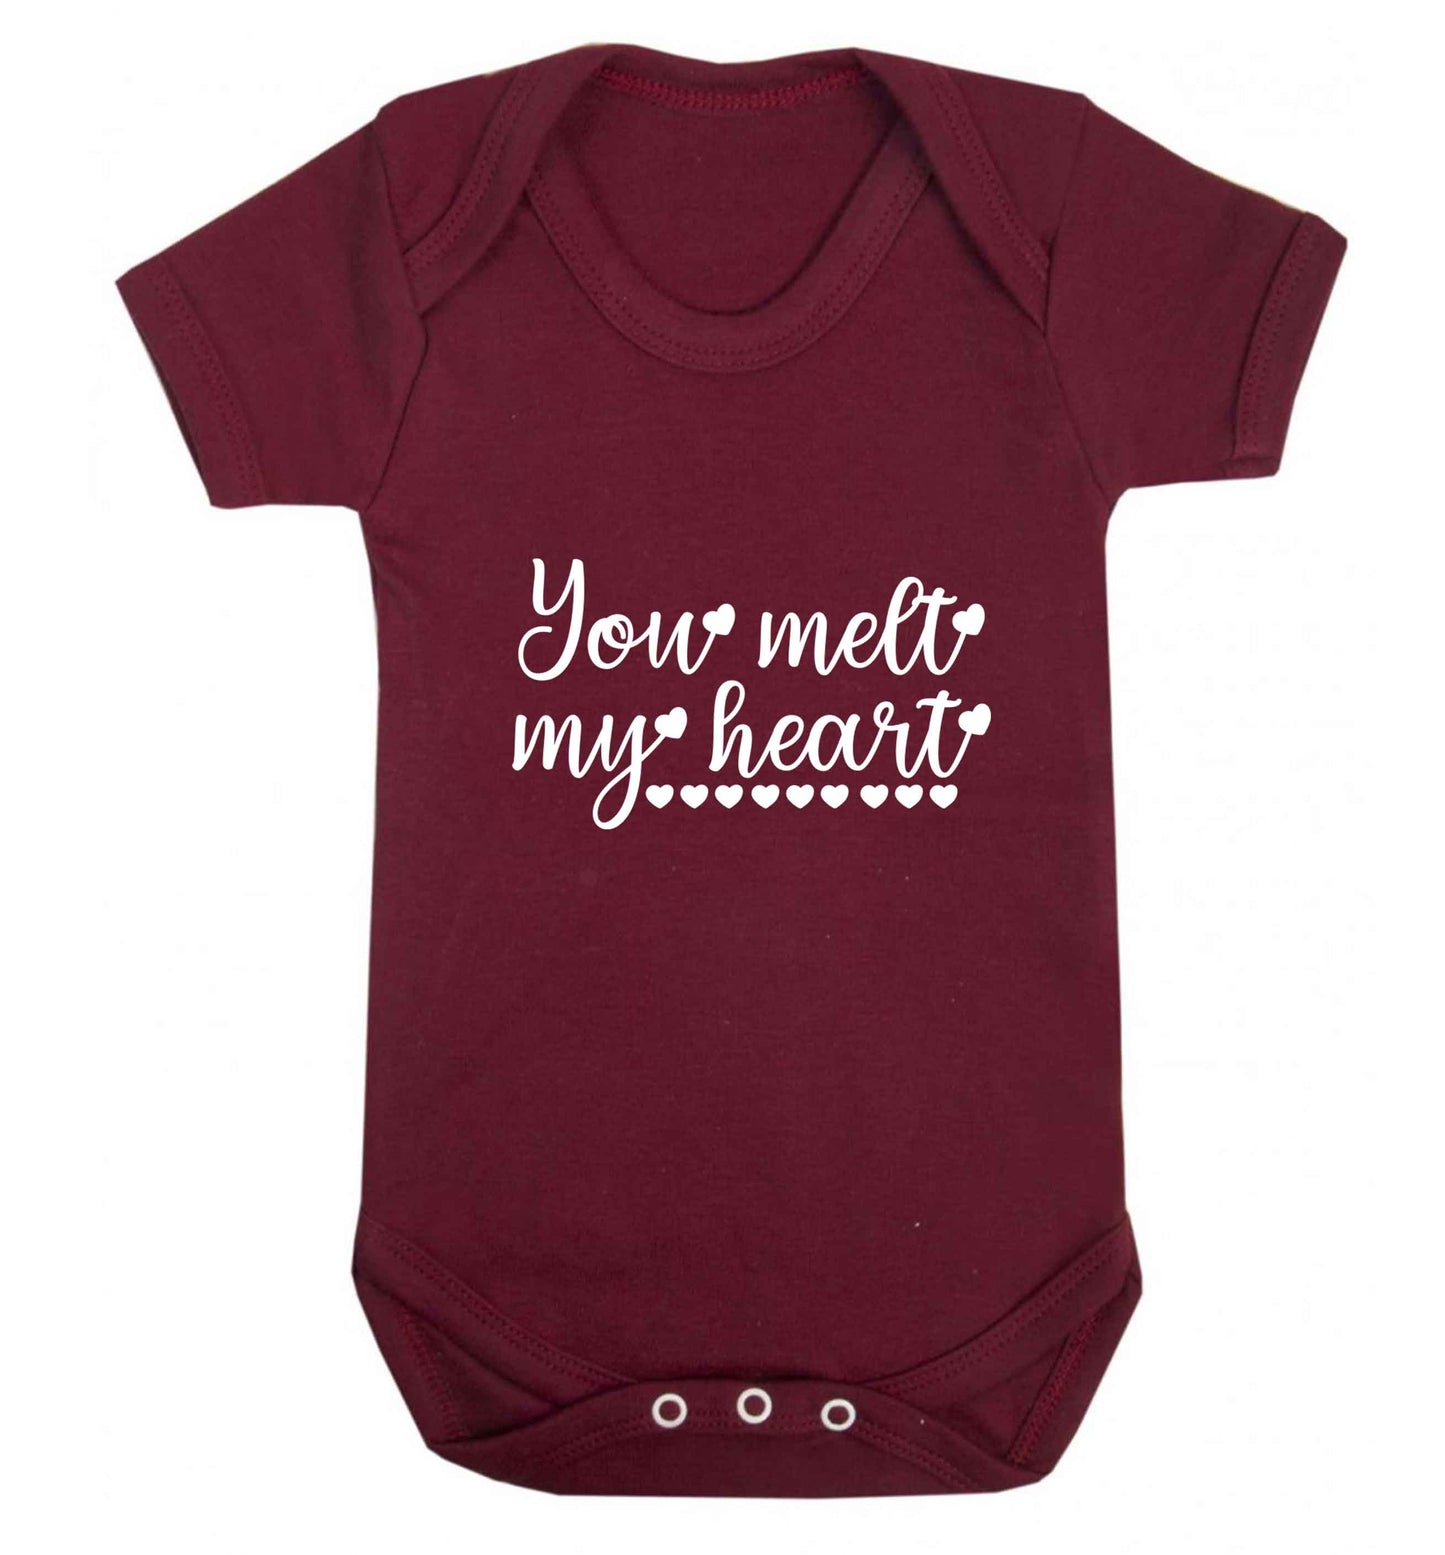 You melt my heart baby vest maroon 18-24 months